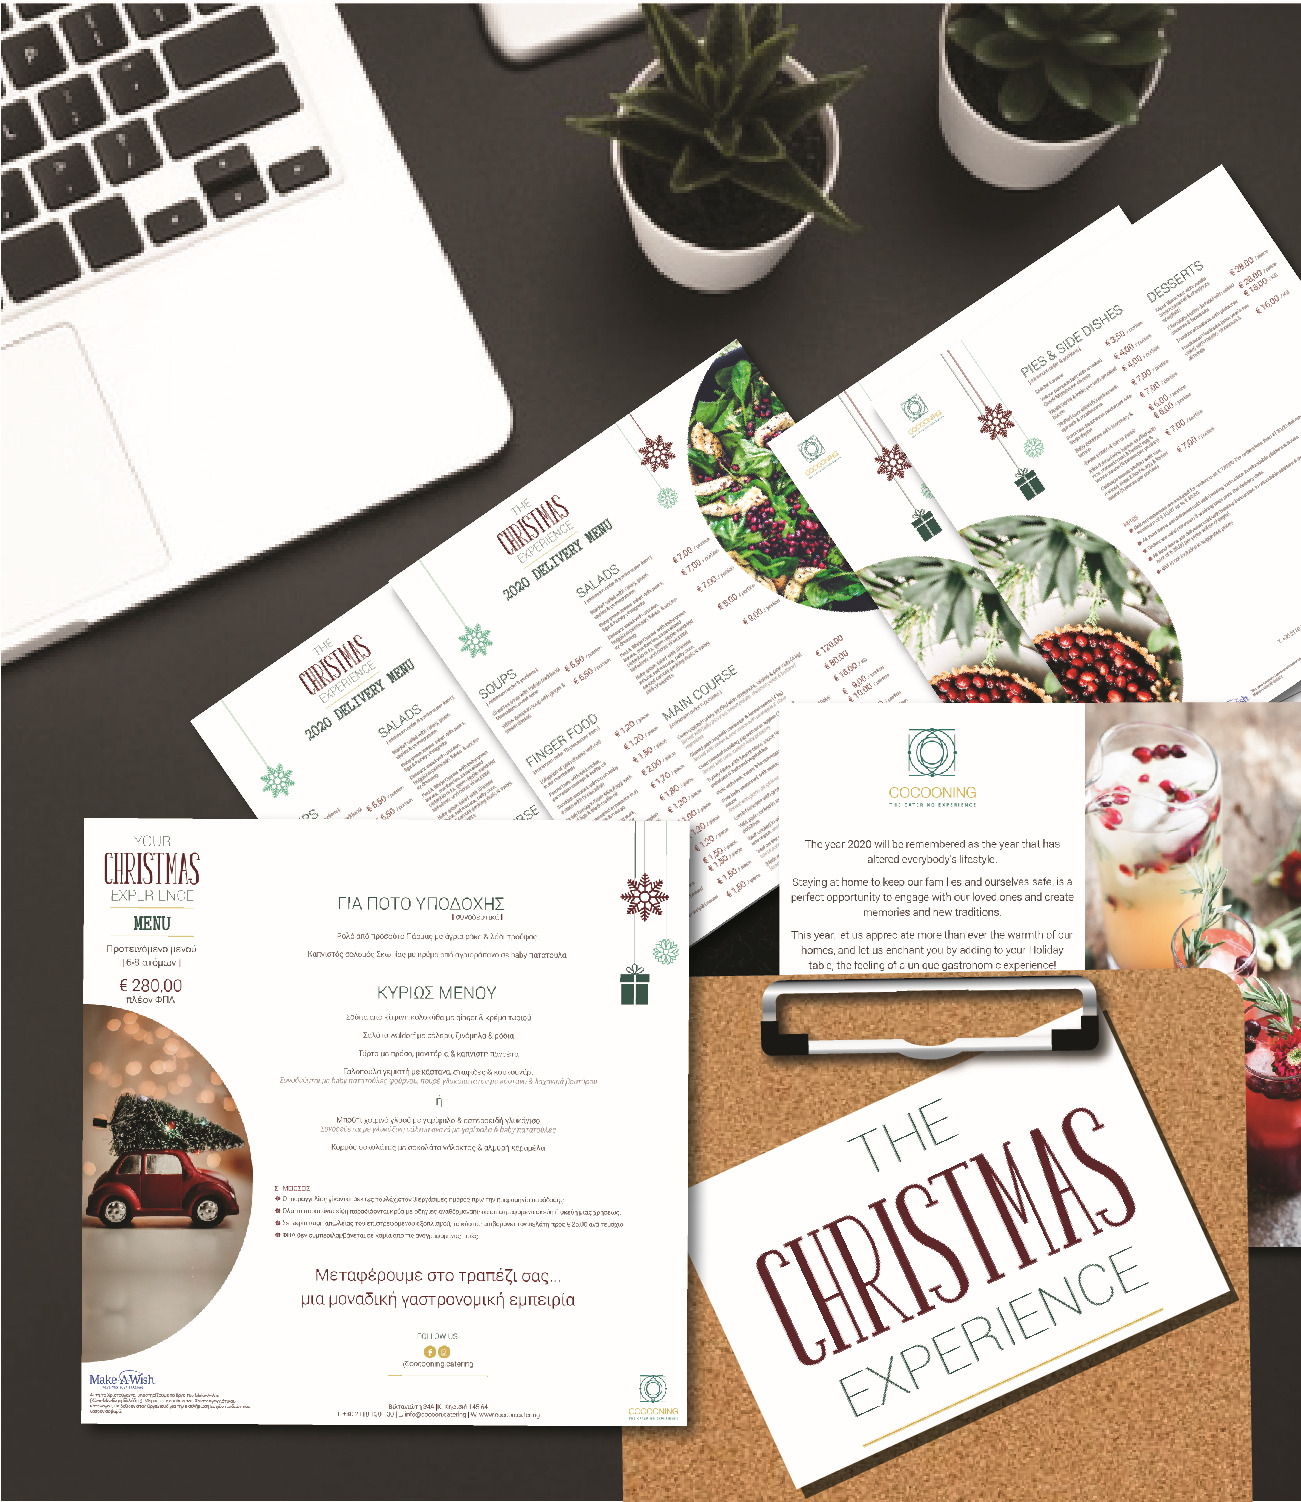 cocooning - christmas campaign design